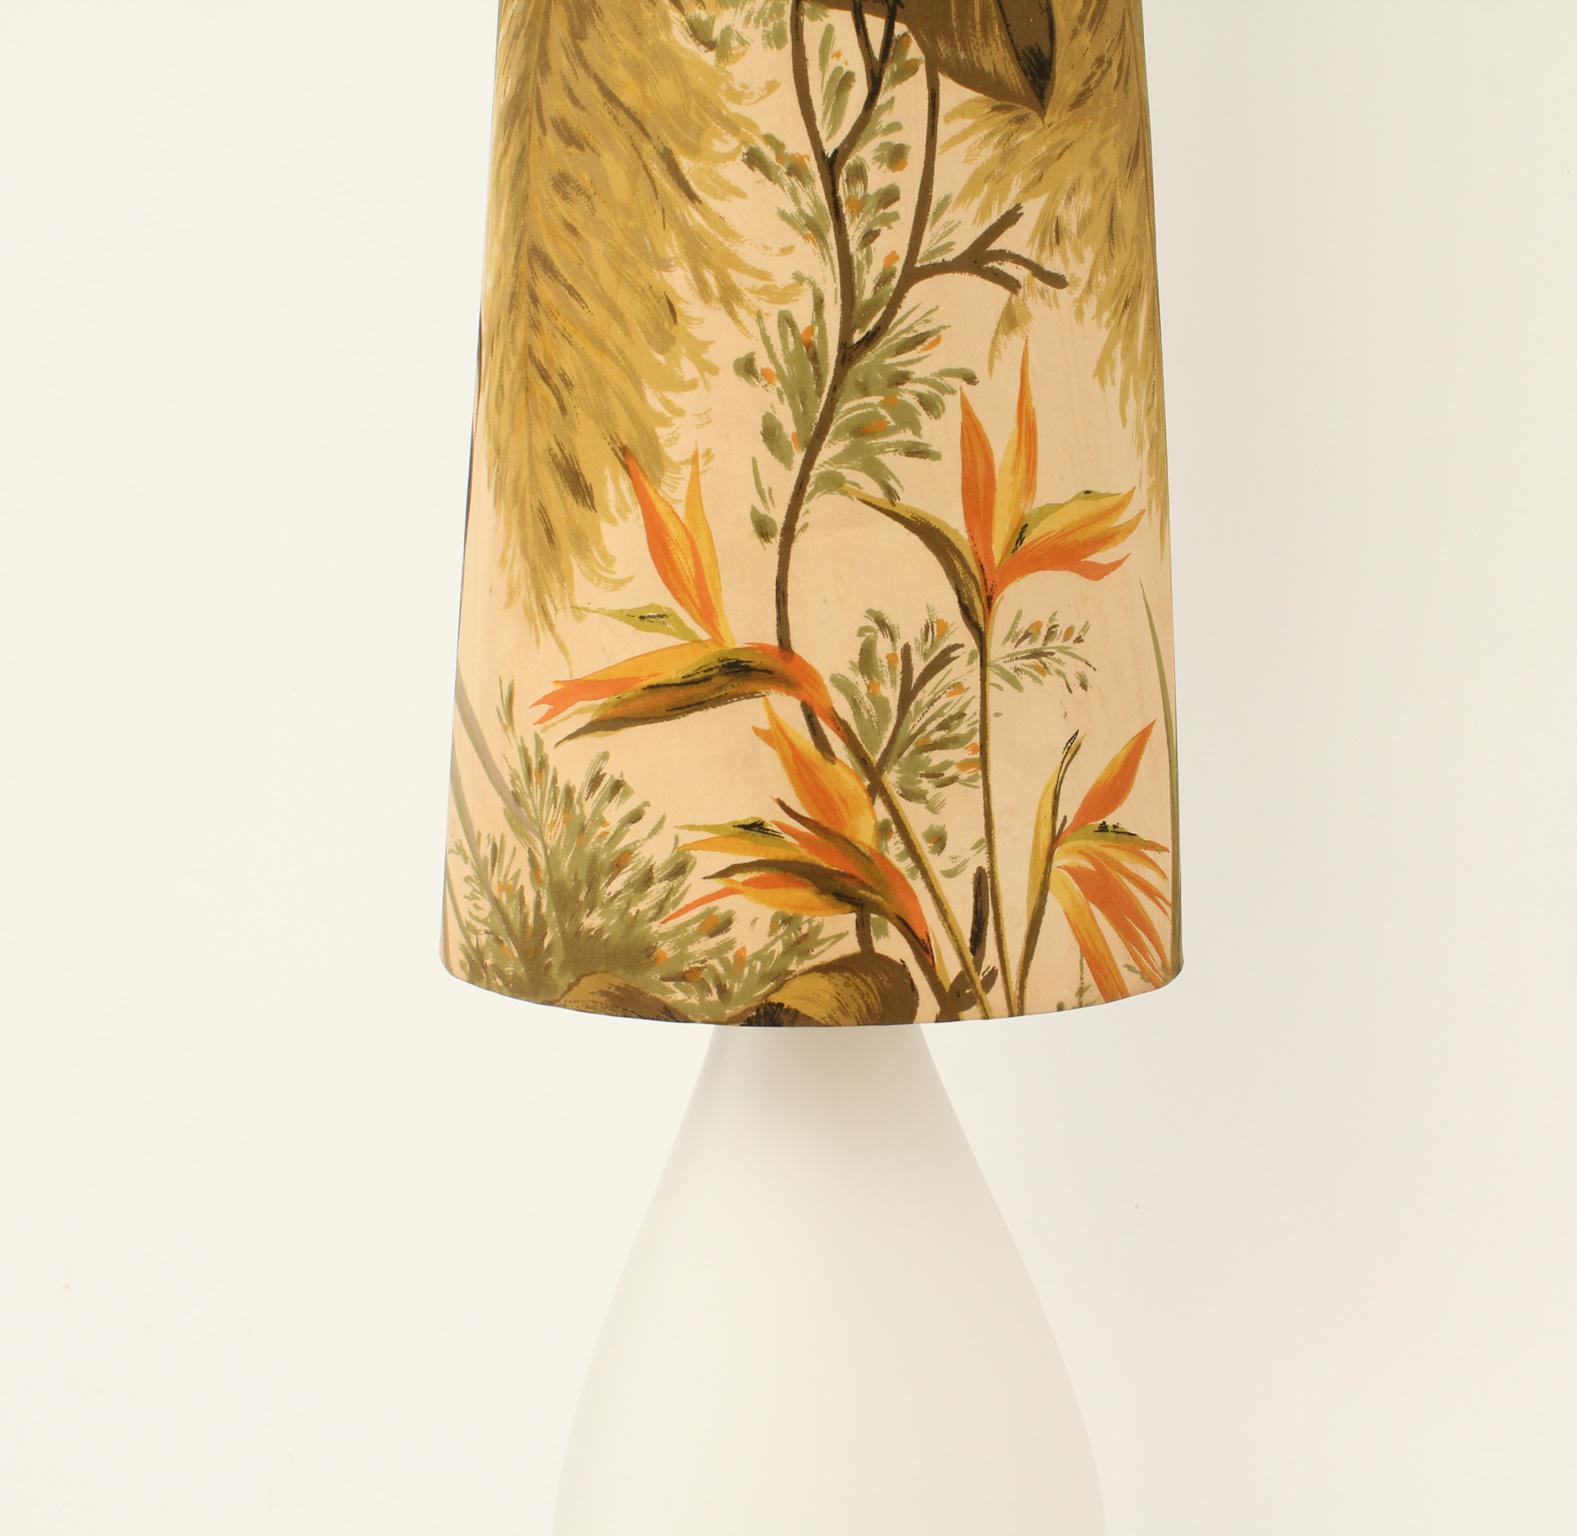 Mid-Century Modern Large Floor or Table Lamp with Opal Glass Base, Germany, 1950's For Sale